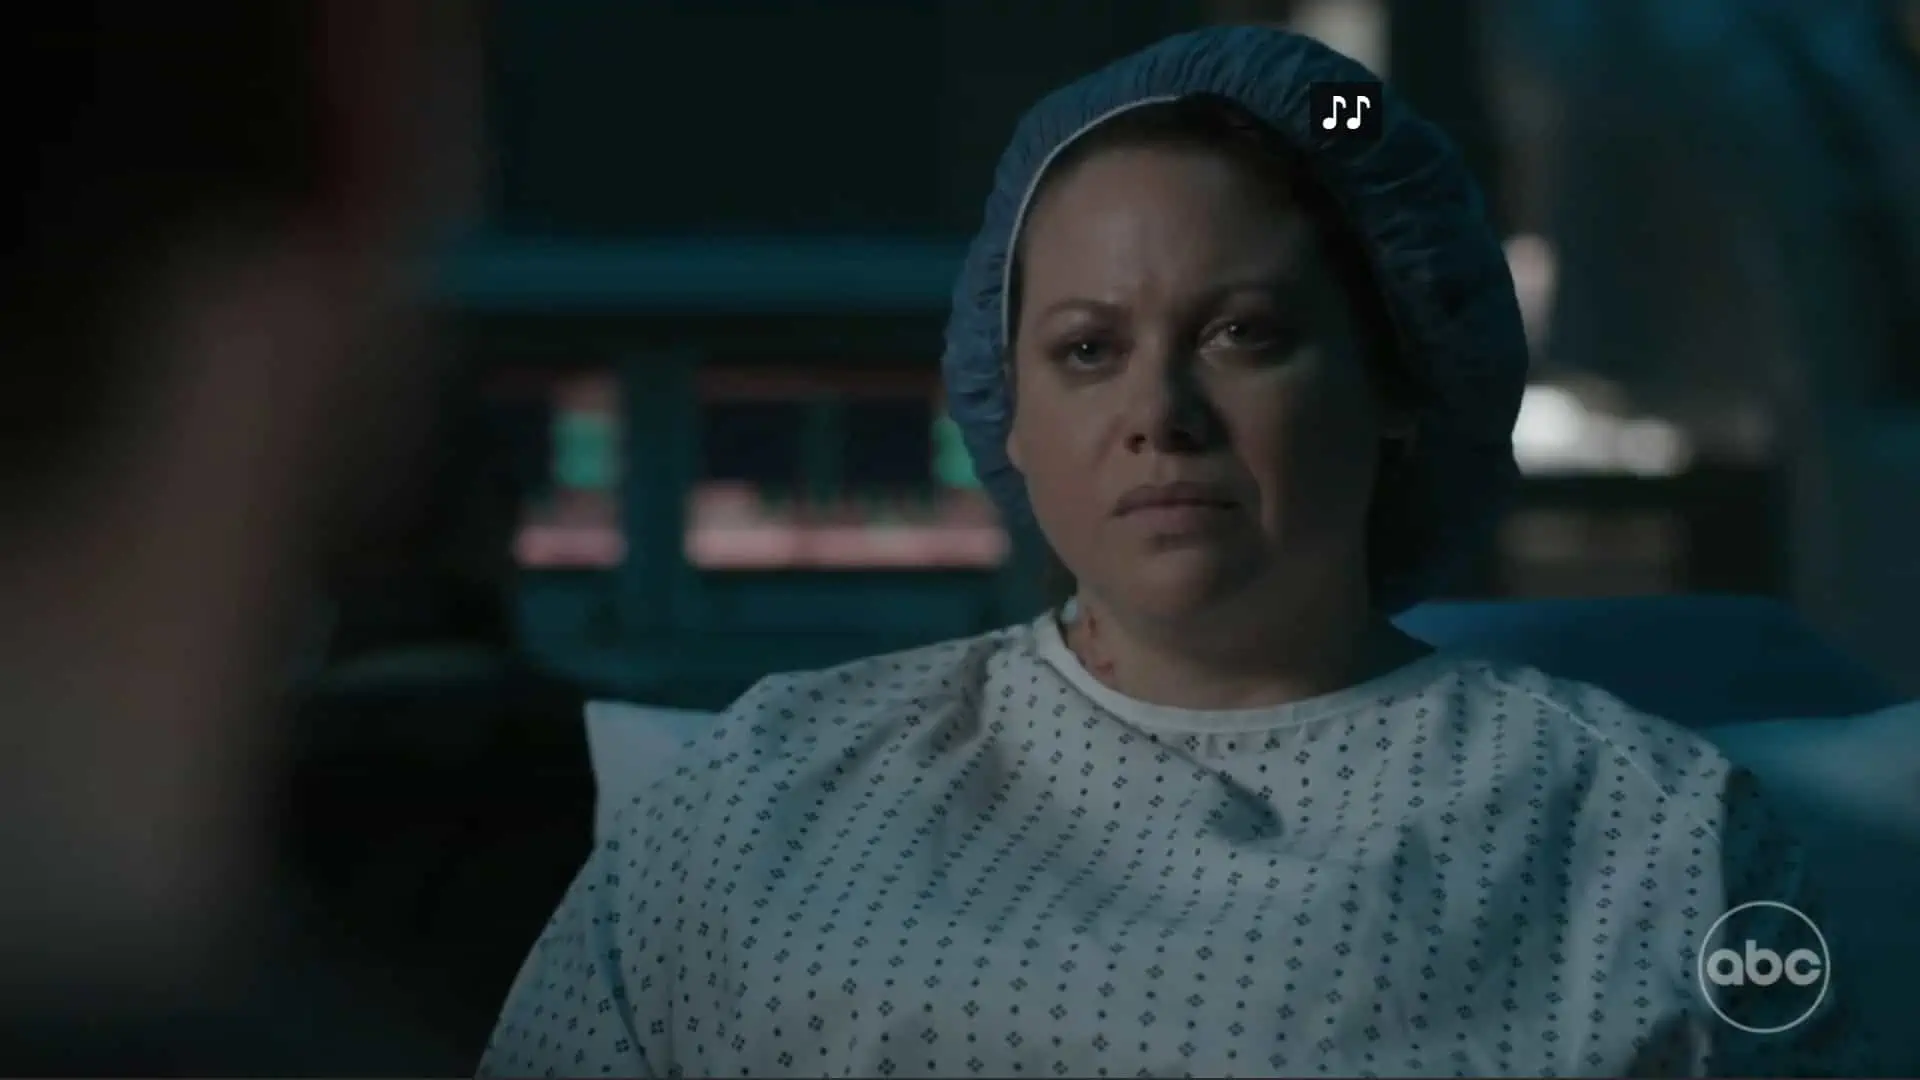 Candace (Roberta Valderrama) in the middle of her operation